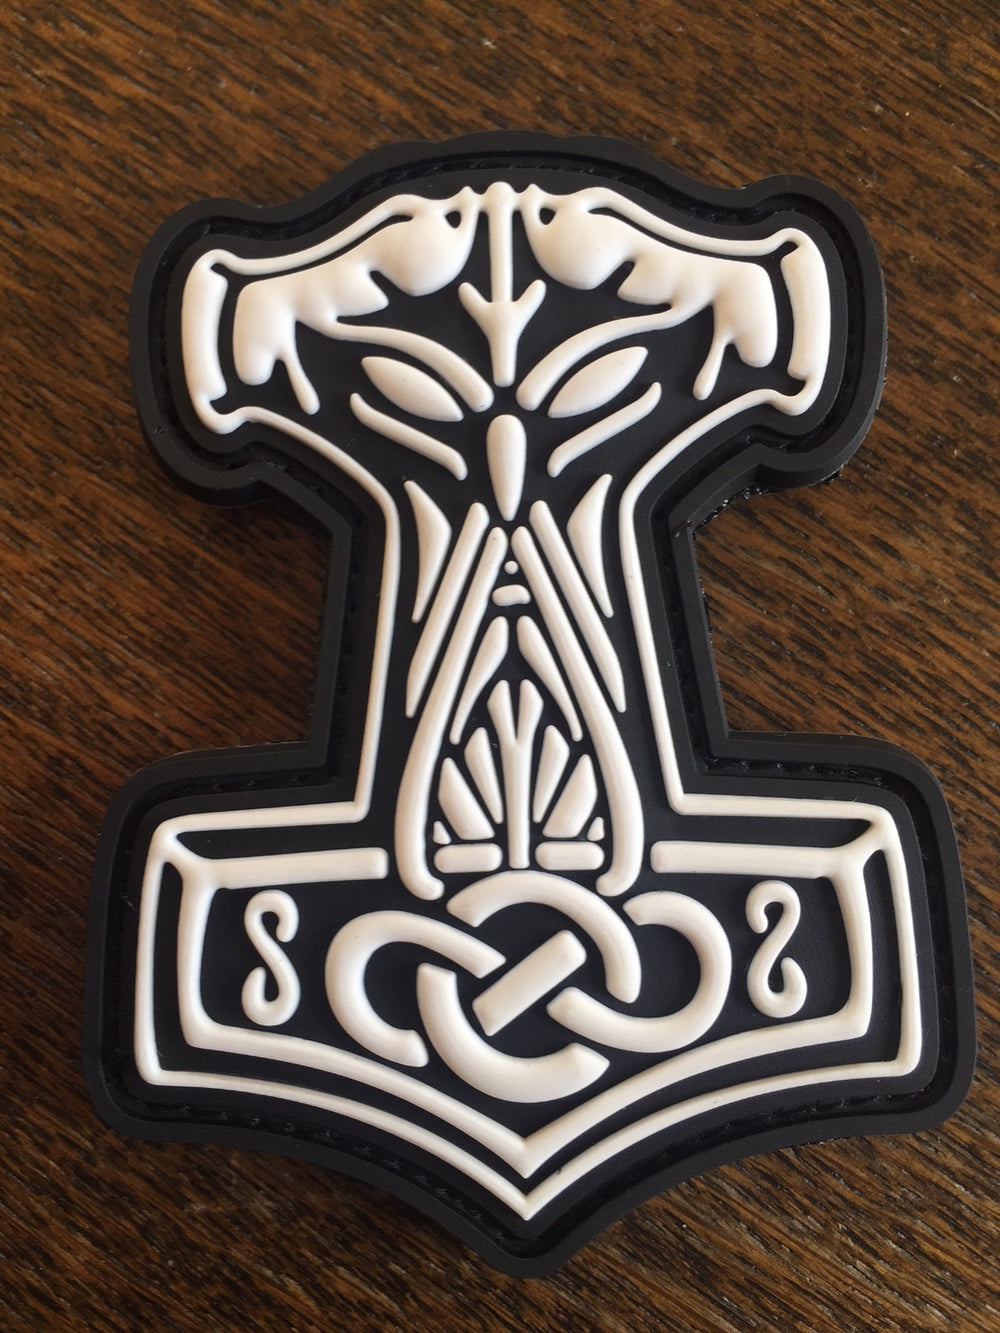 Dragon Thors Hammer Patch Swat